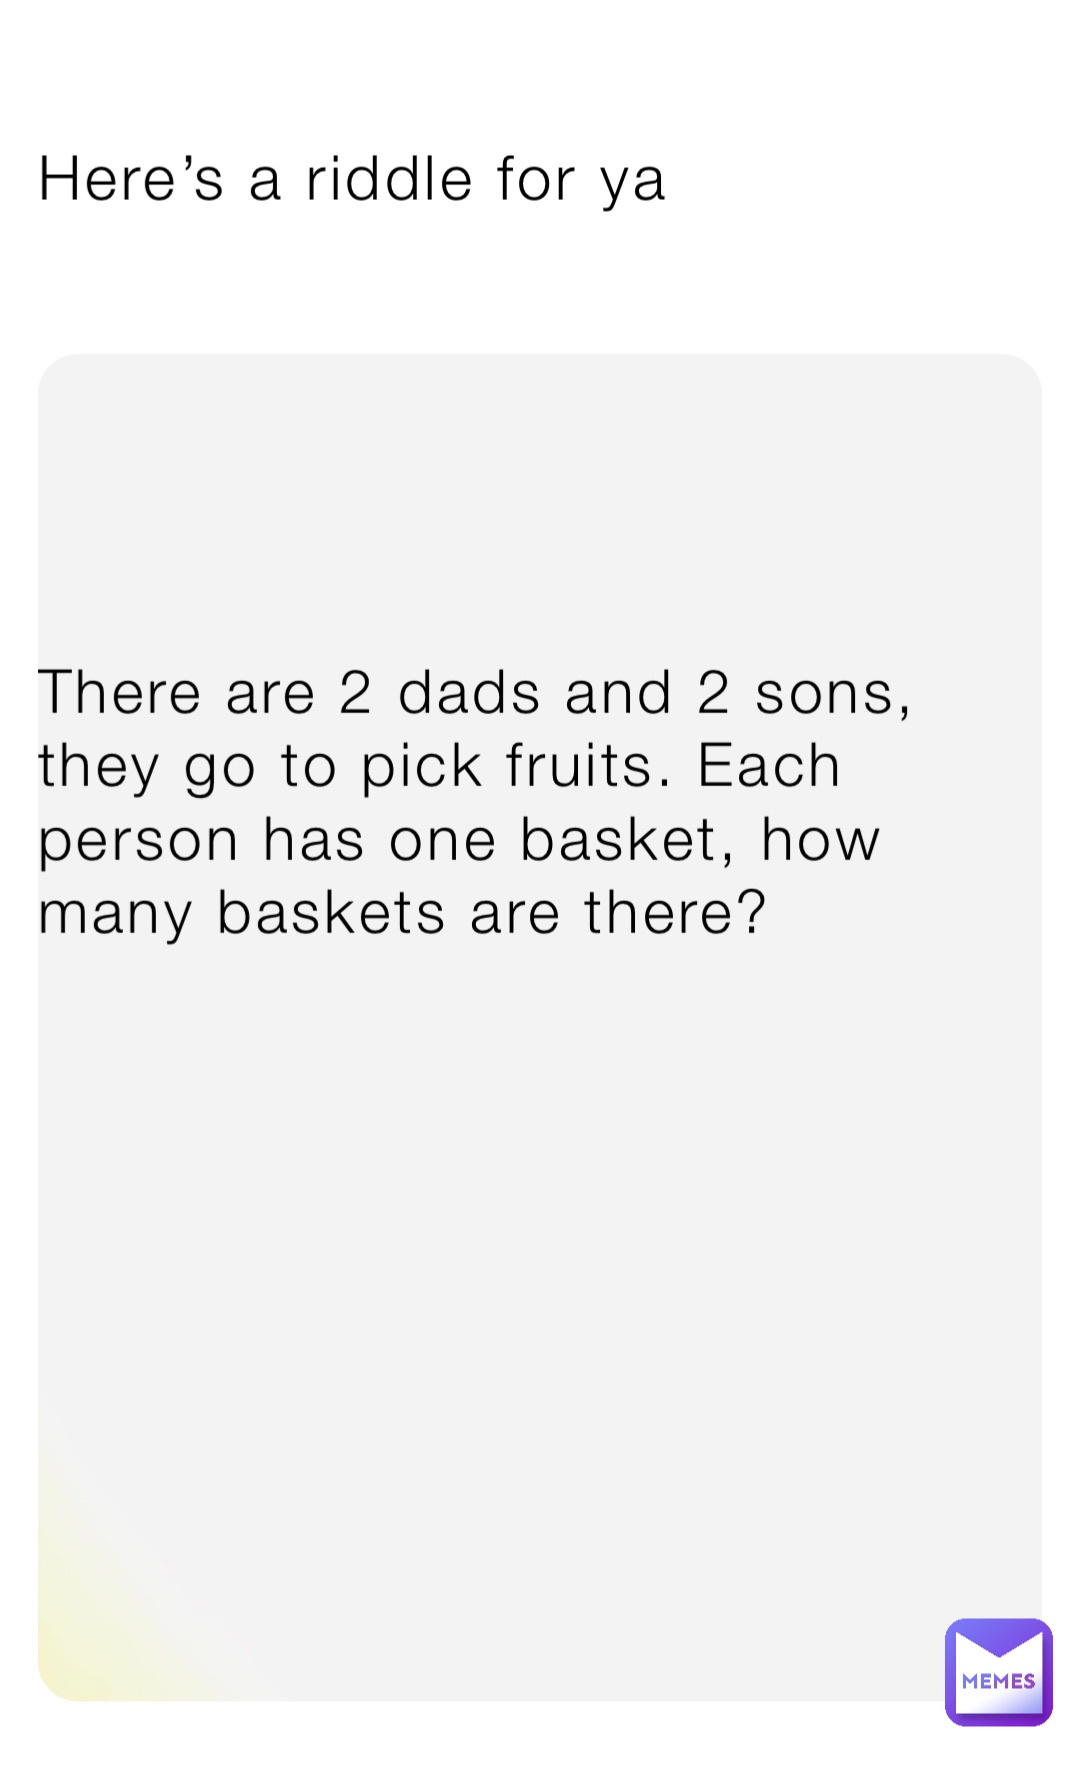 Here’s a riddle for ya There are 2 dads and 2 sons, they go to pick fruits. Each person has one basket, how many baskets are there?